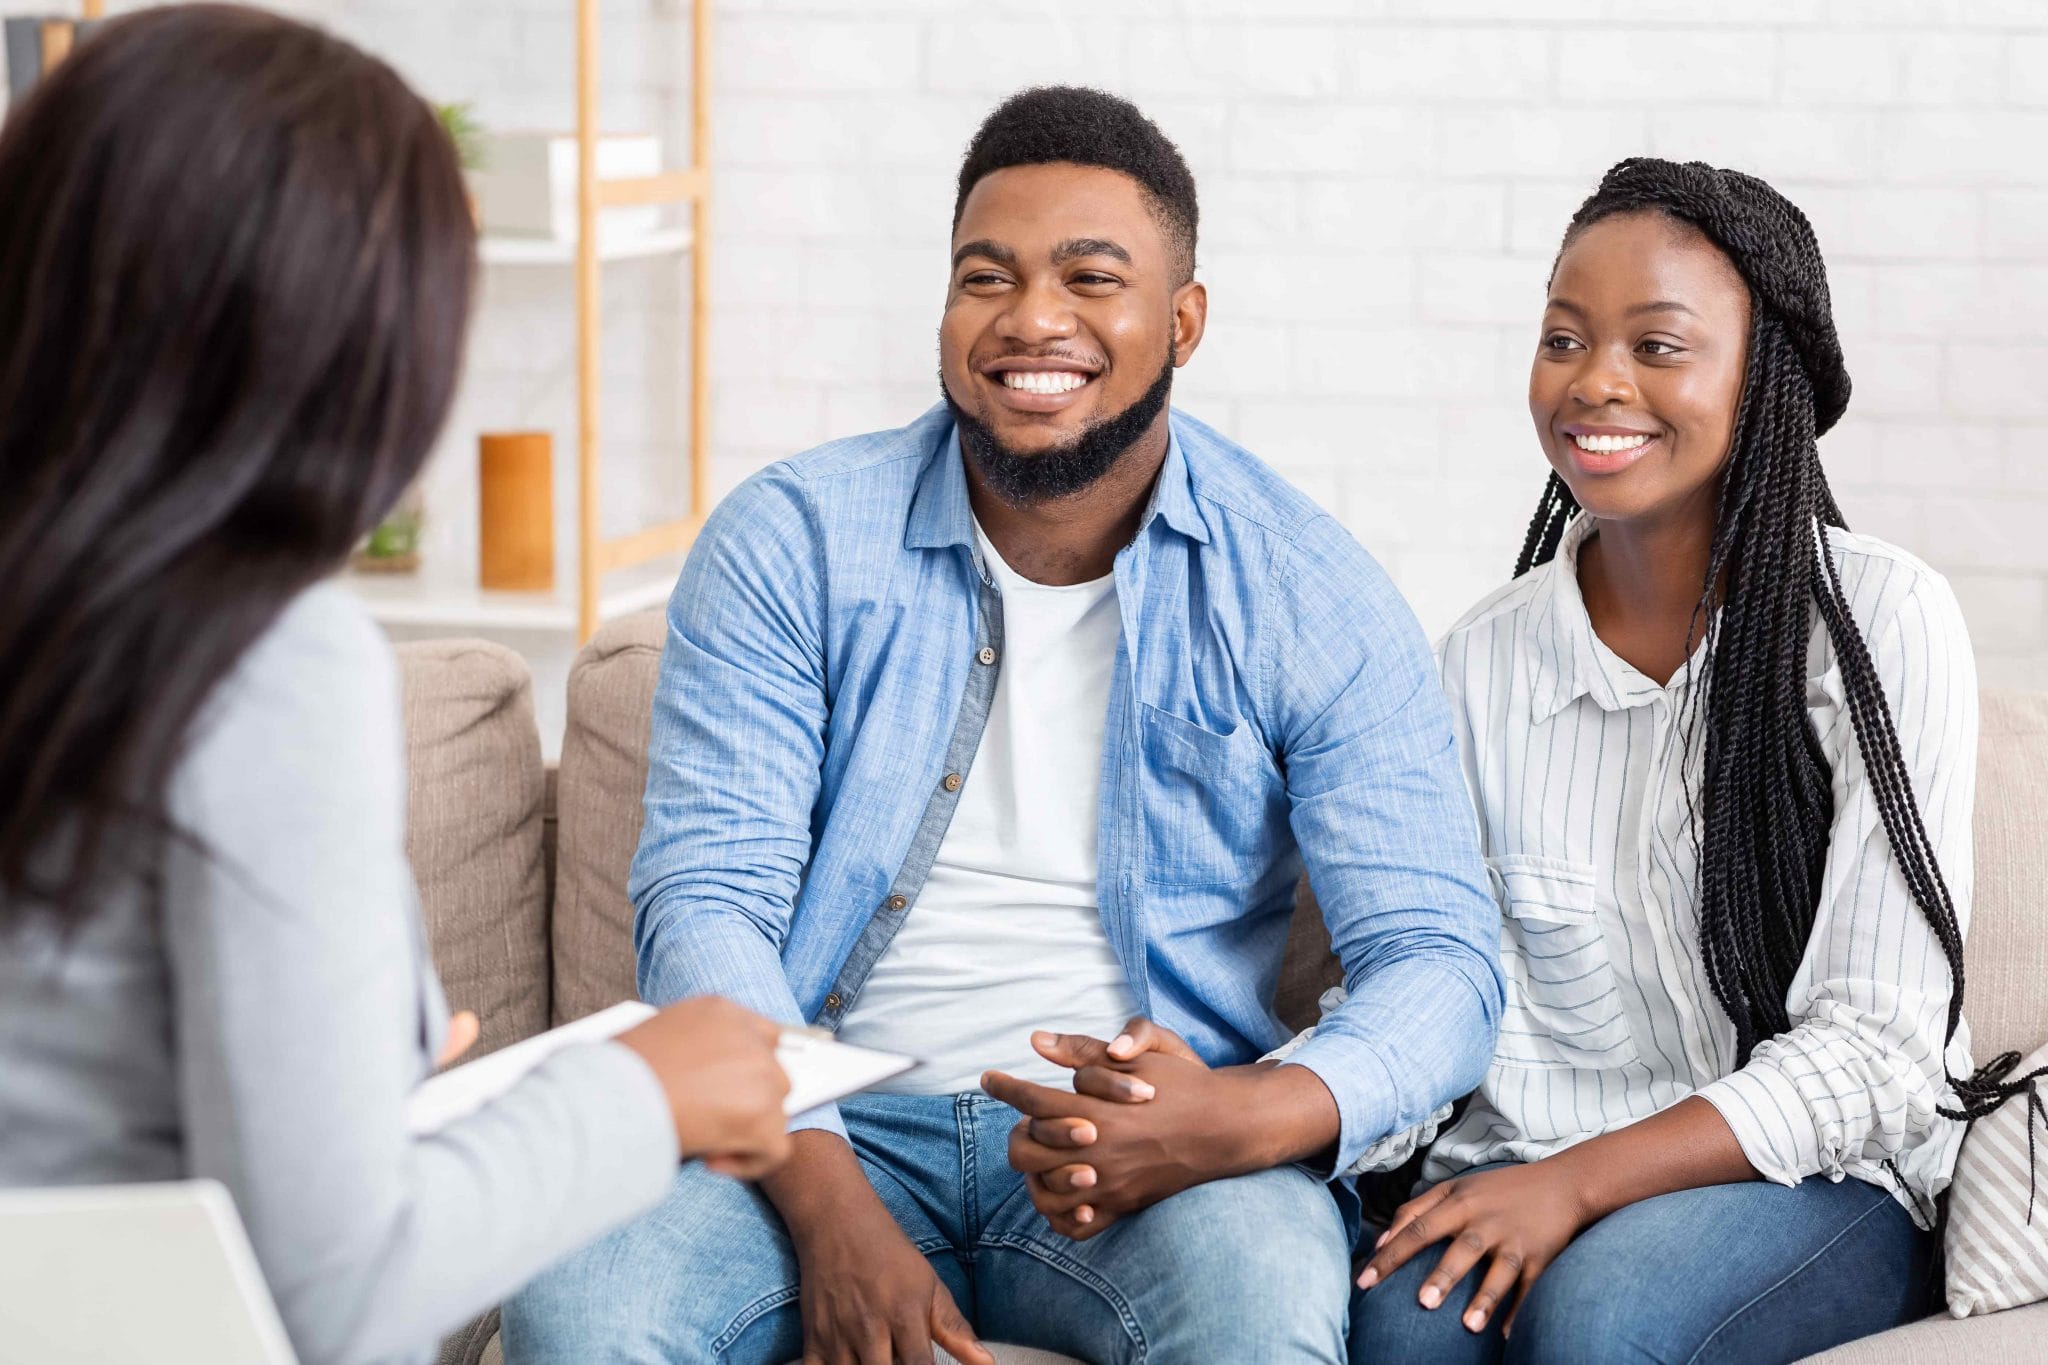 African American couple smiling during counseling session speaking with a therapist